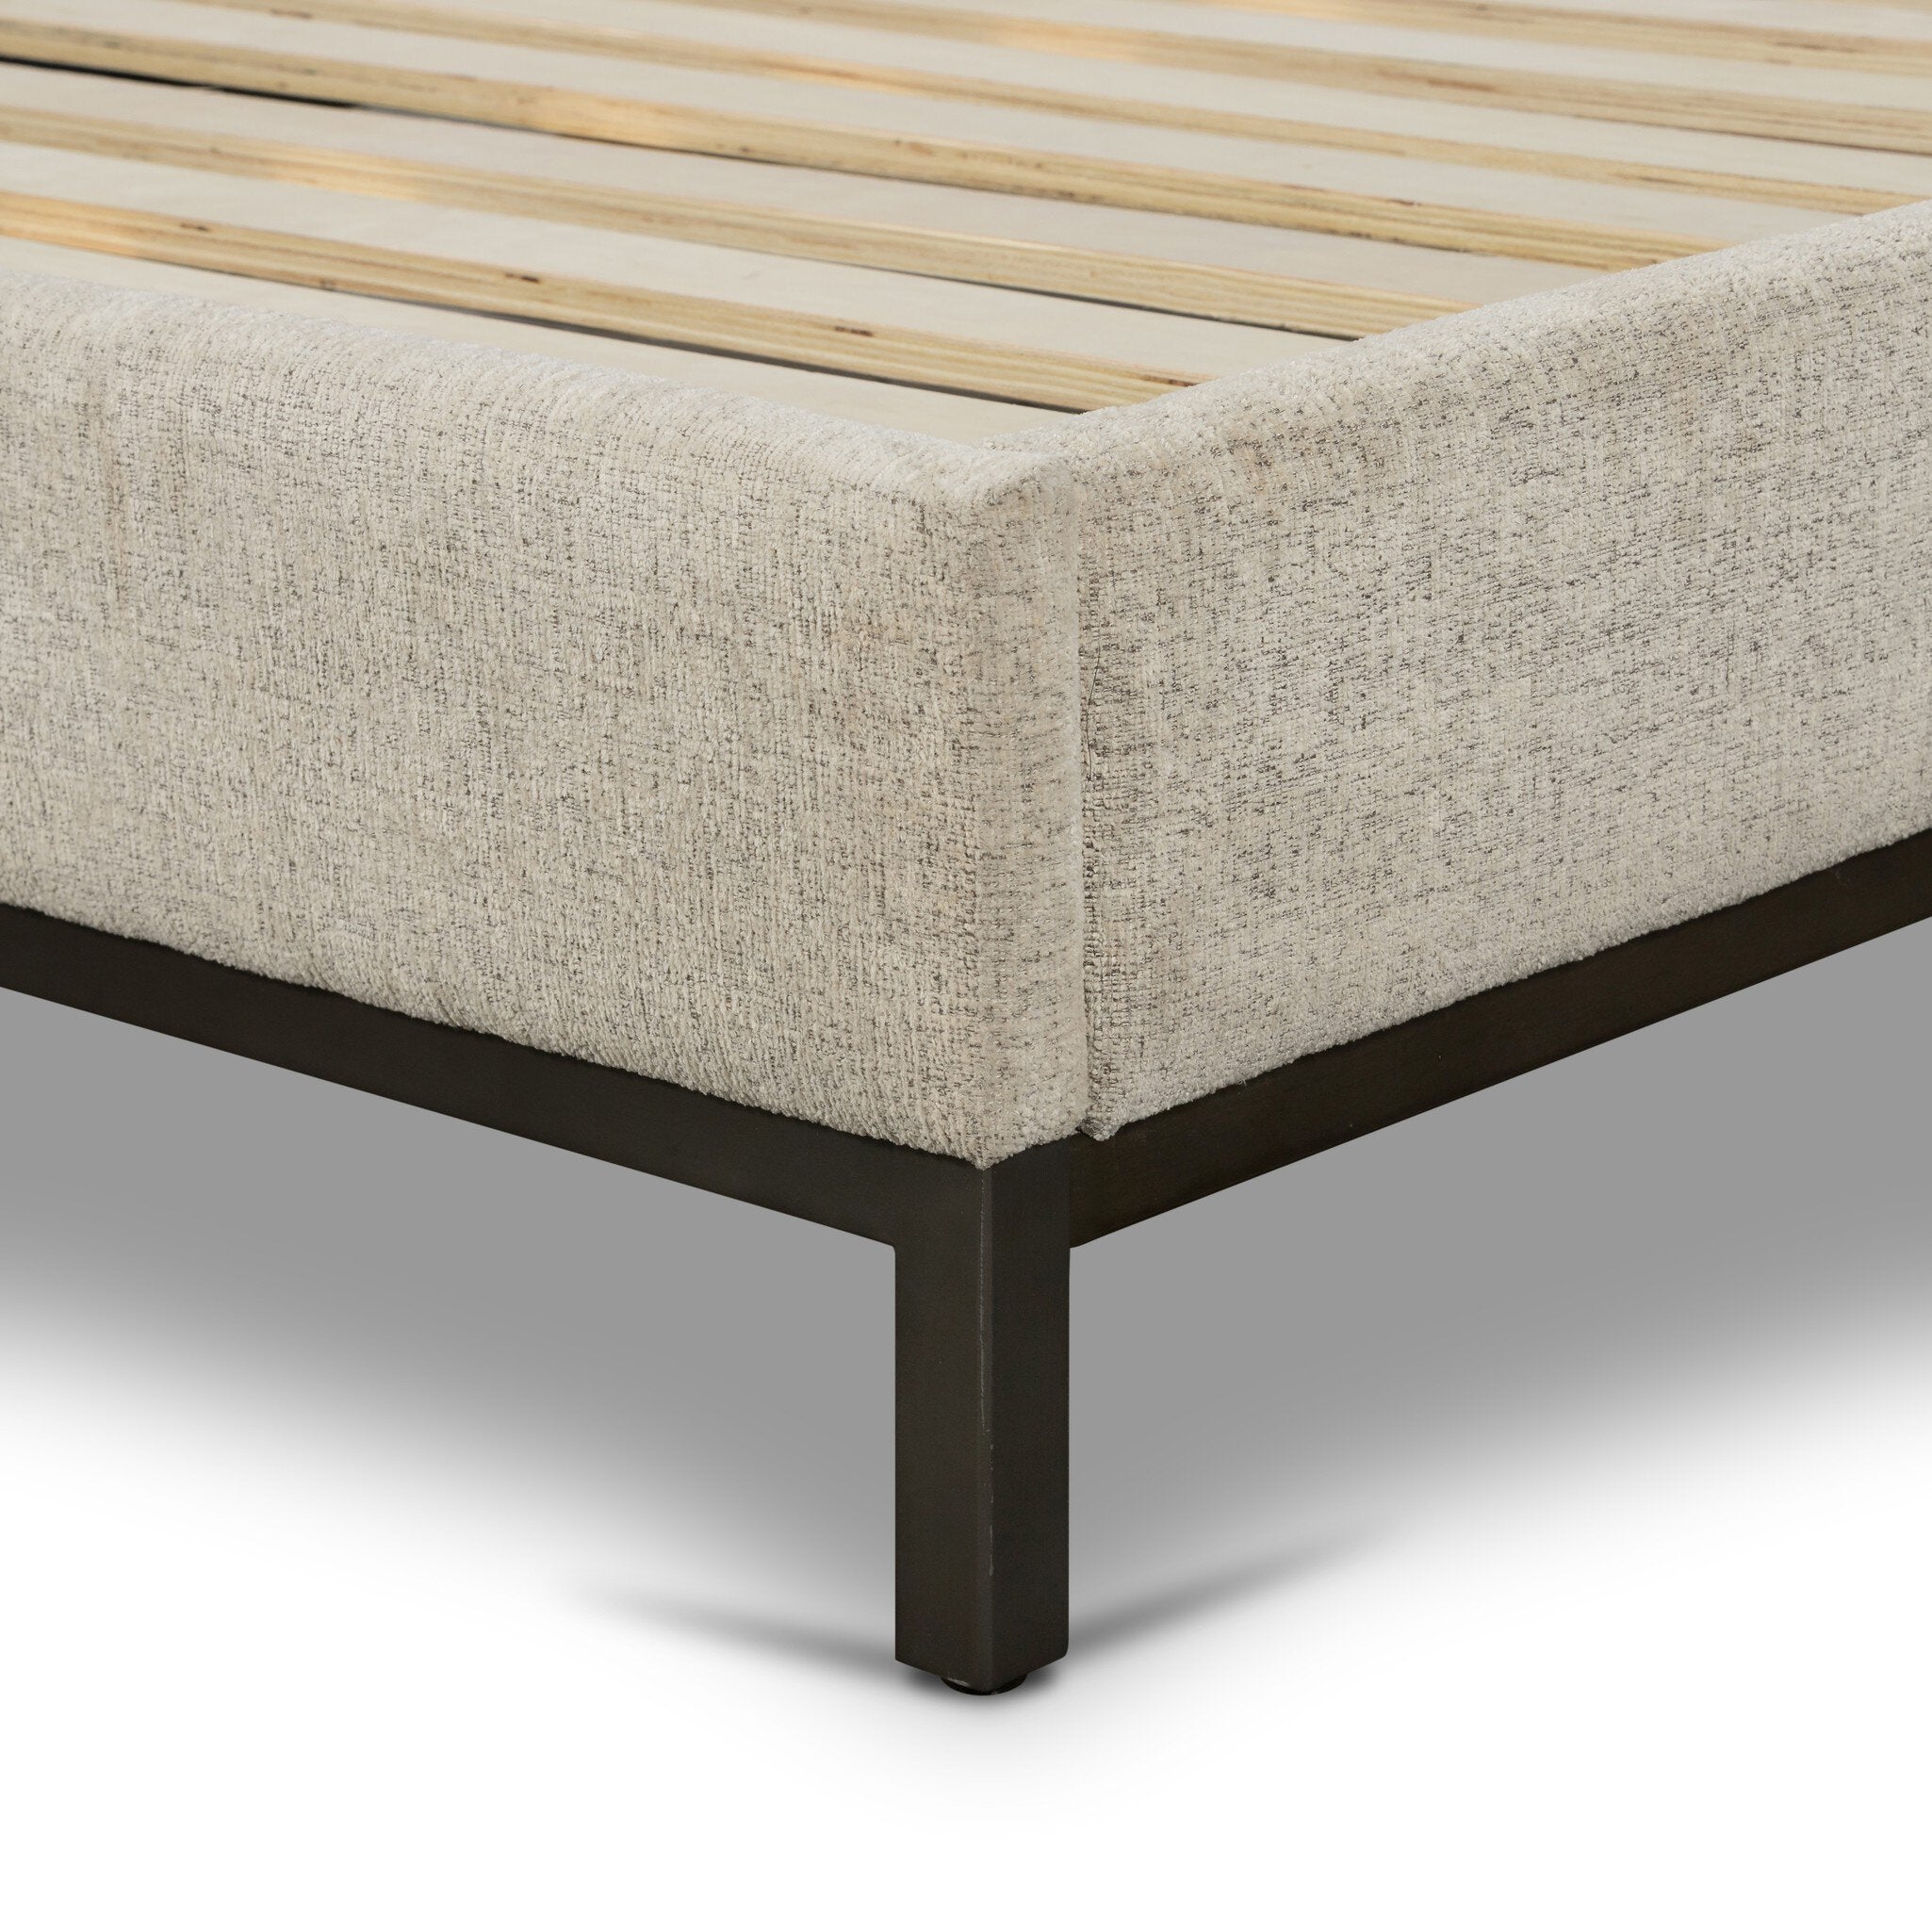 Newhall Bed - Plushtone Linen